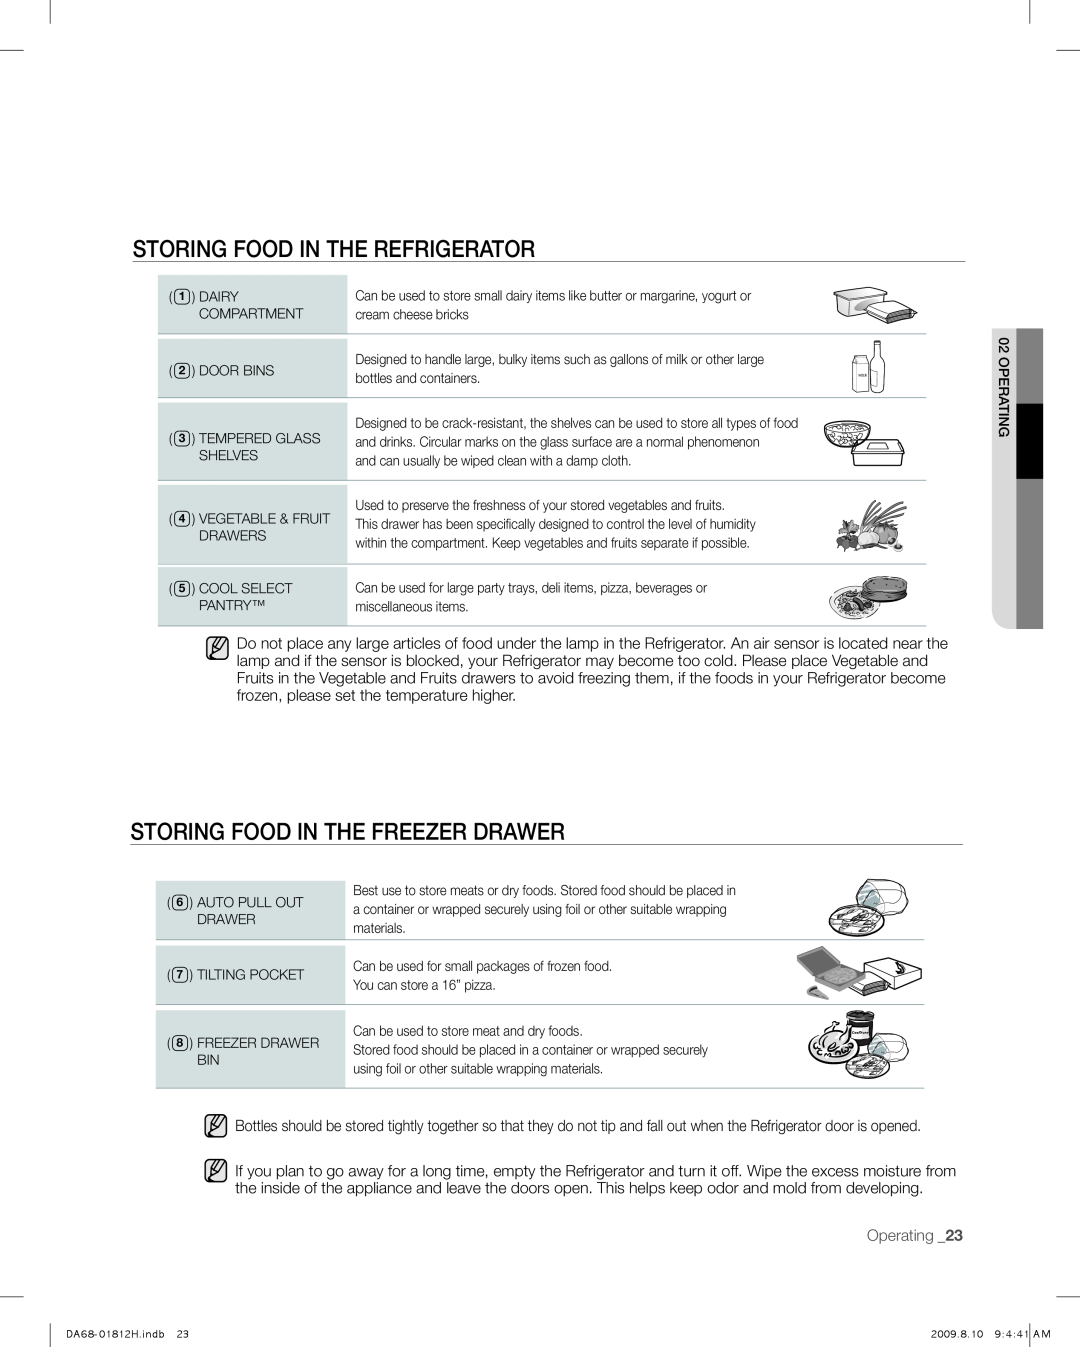 Samsung RF263 user manual Storing Food in the Refrigerator, Storing Food in the Freezer Drawer, Operating _23 